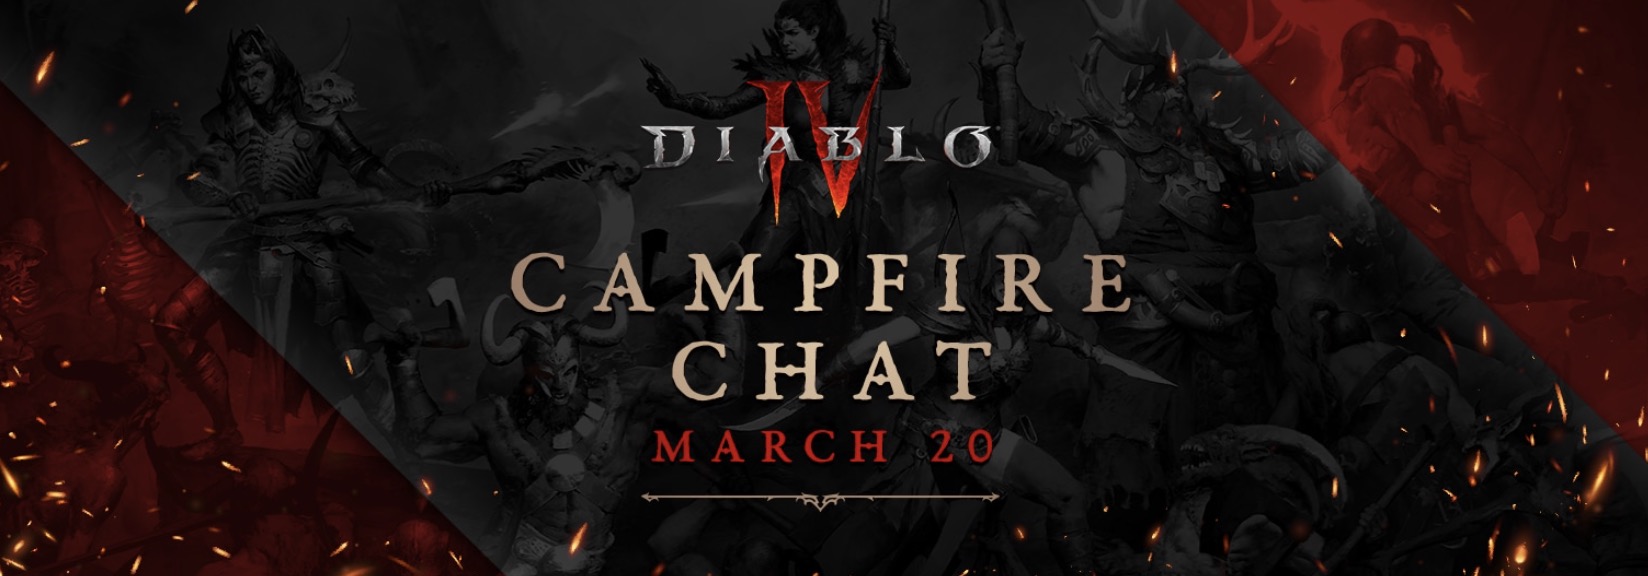 Diablo 4 Season 4 Campfire Chat Slated for March 20th